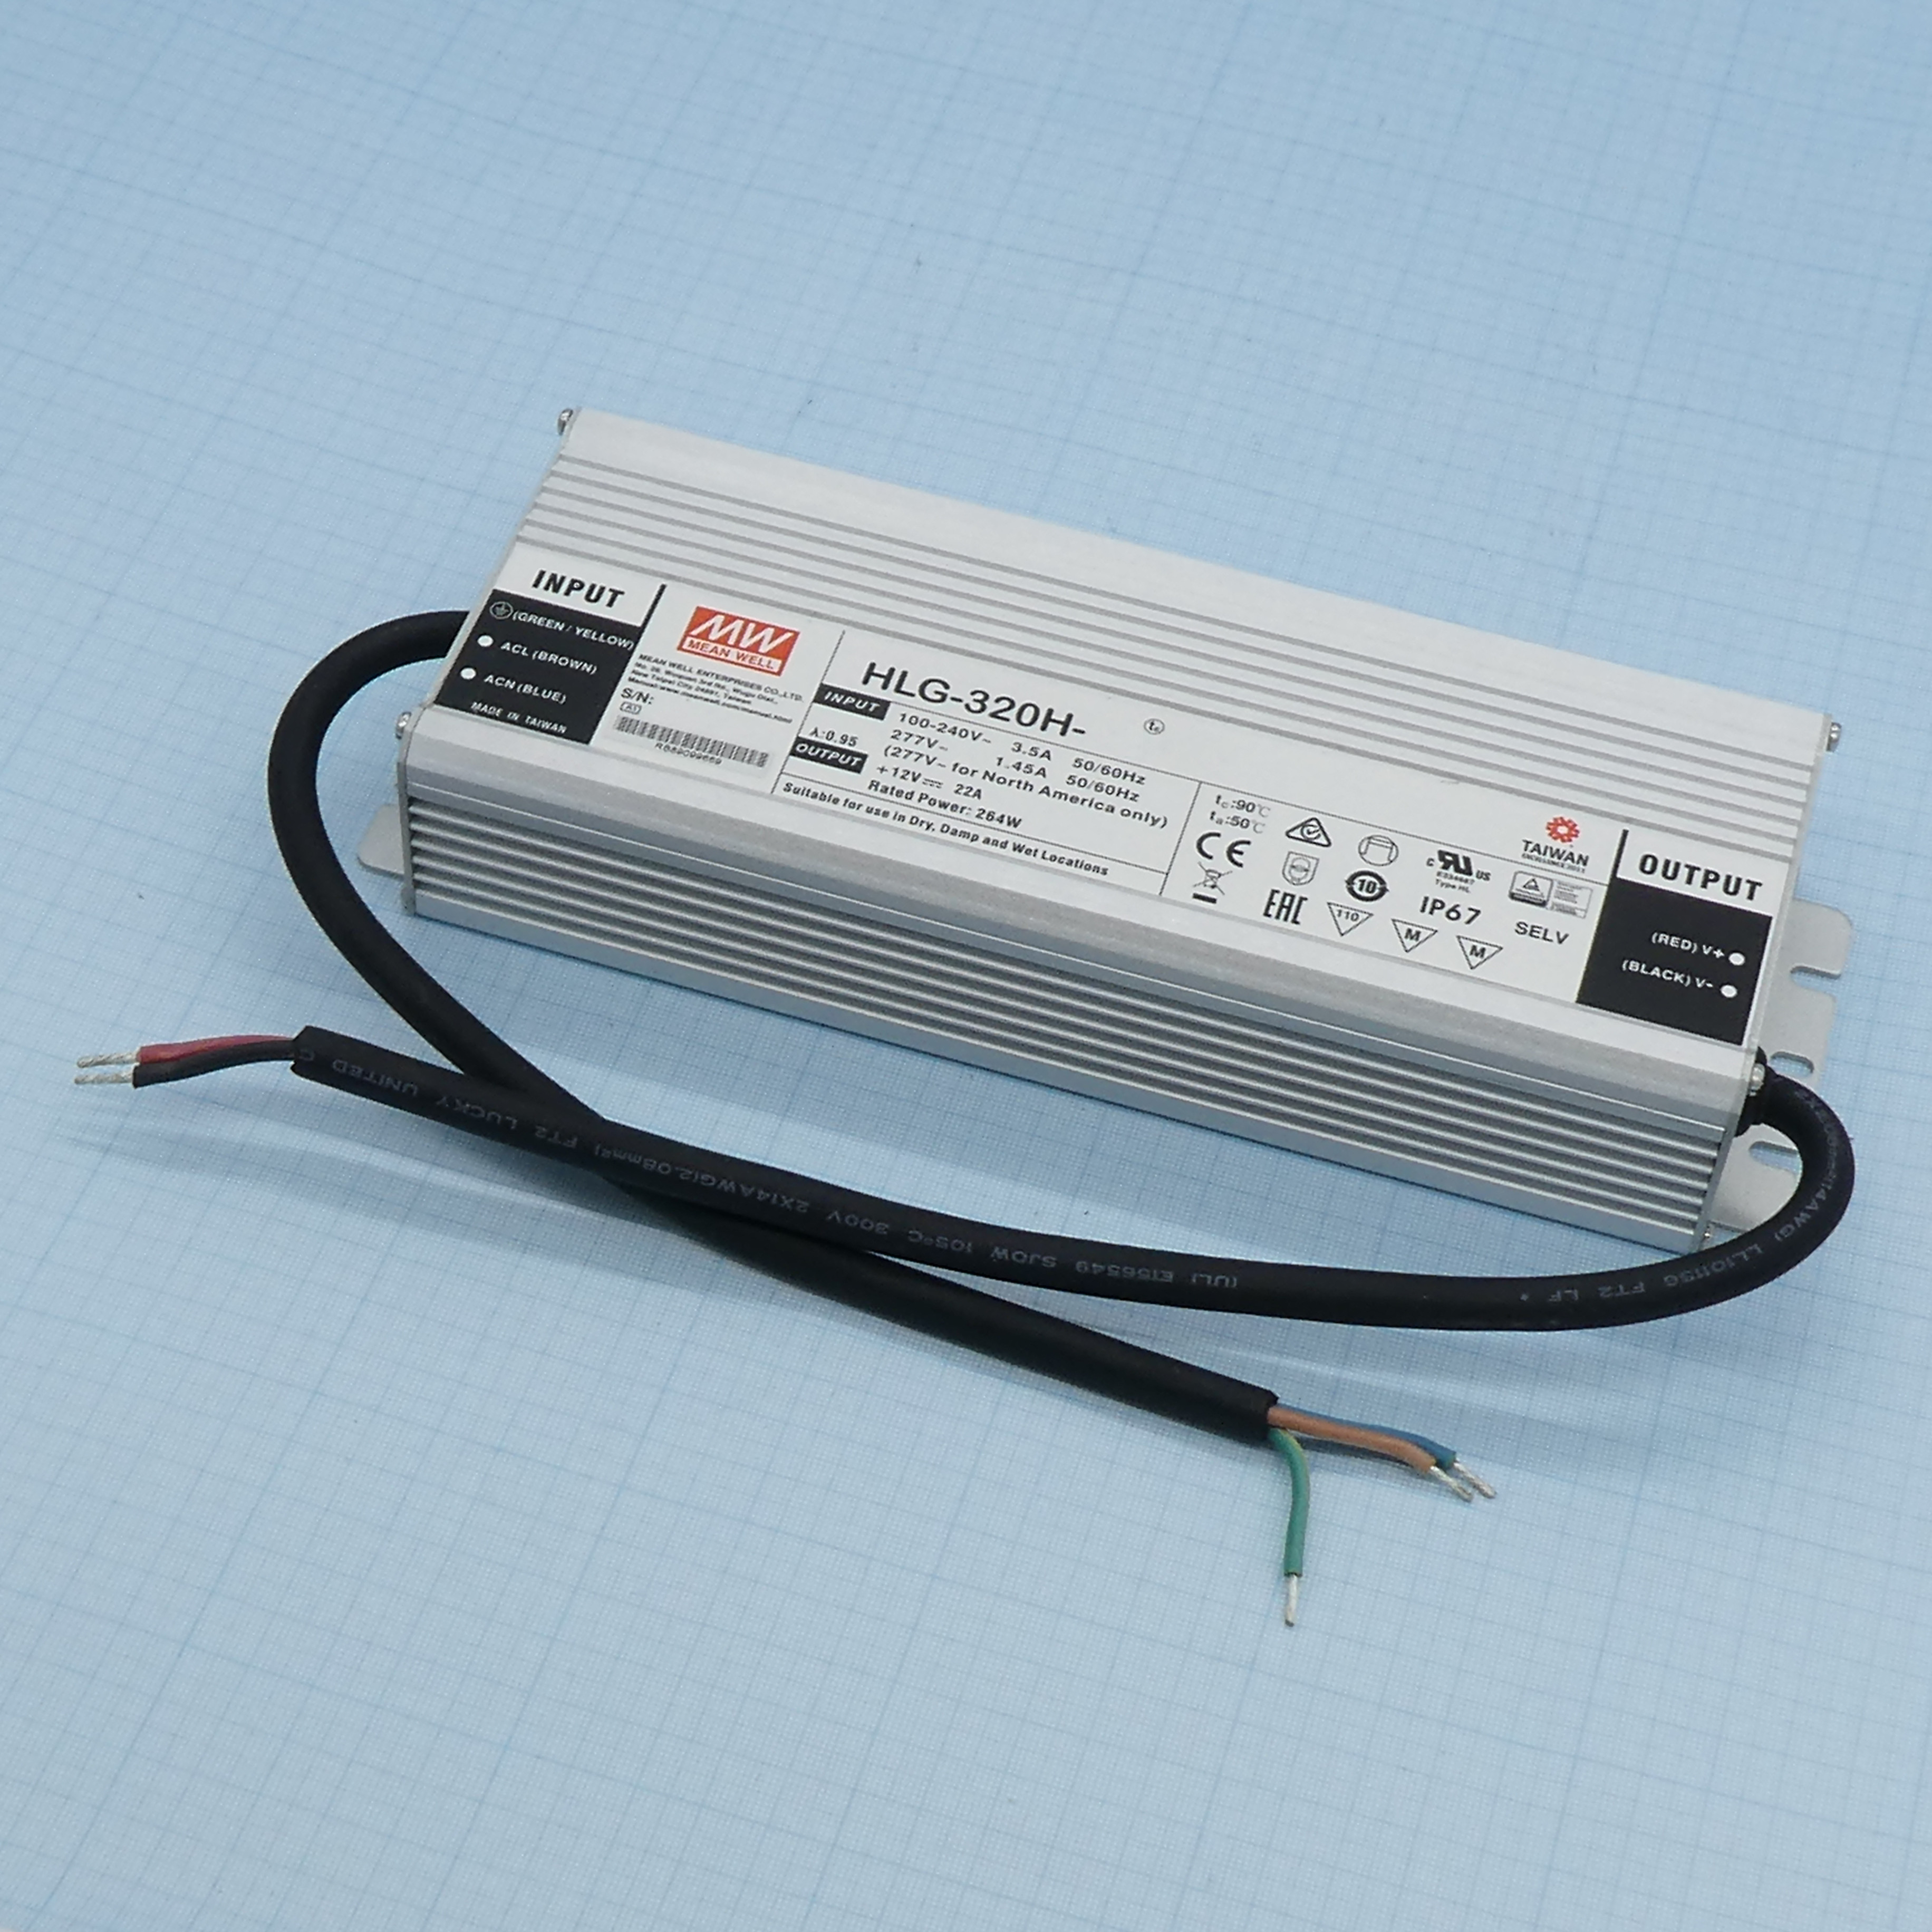 48V constrant voltage Power Supply 320W to power Linear Track system